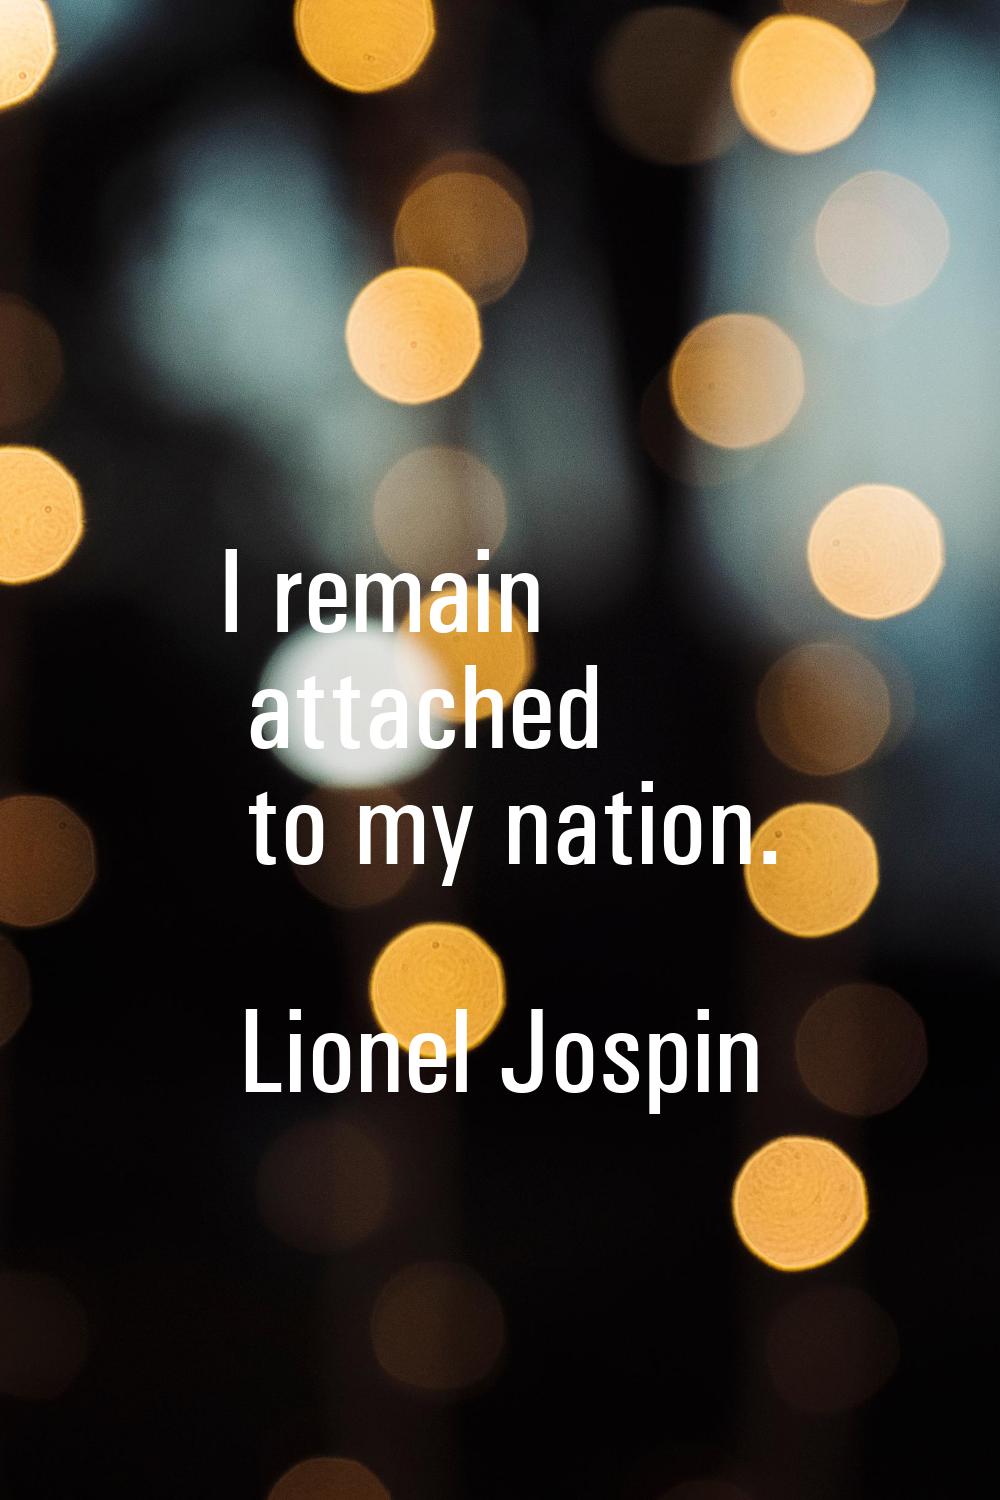 I remain attached to my nation.